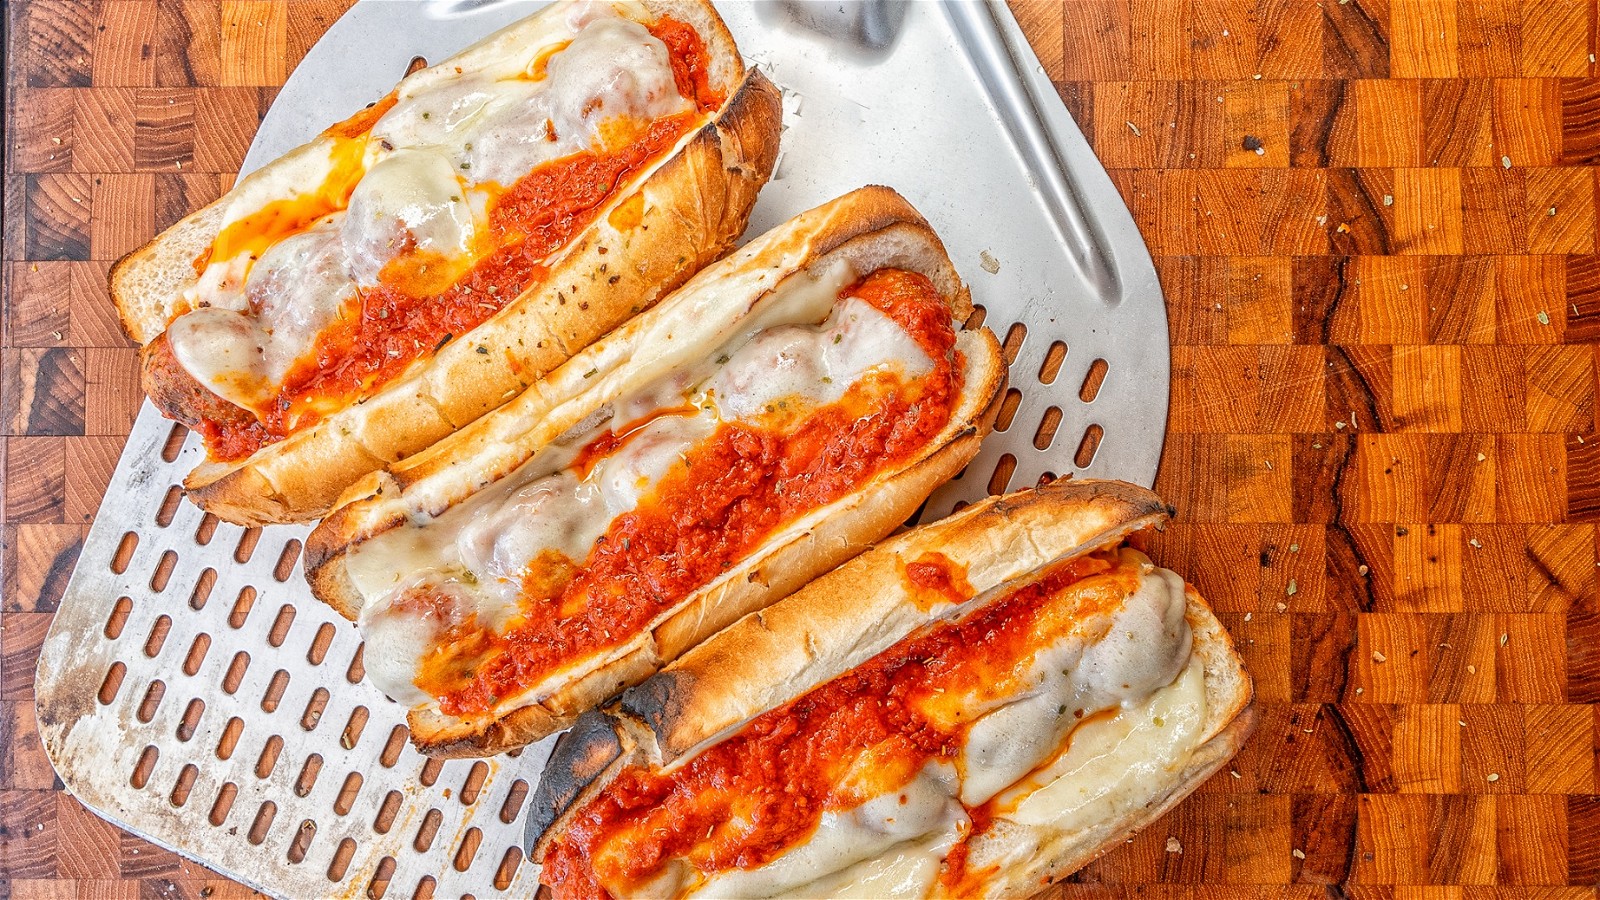 Image of Meatball Subs